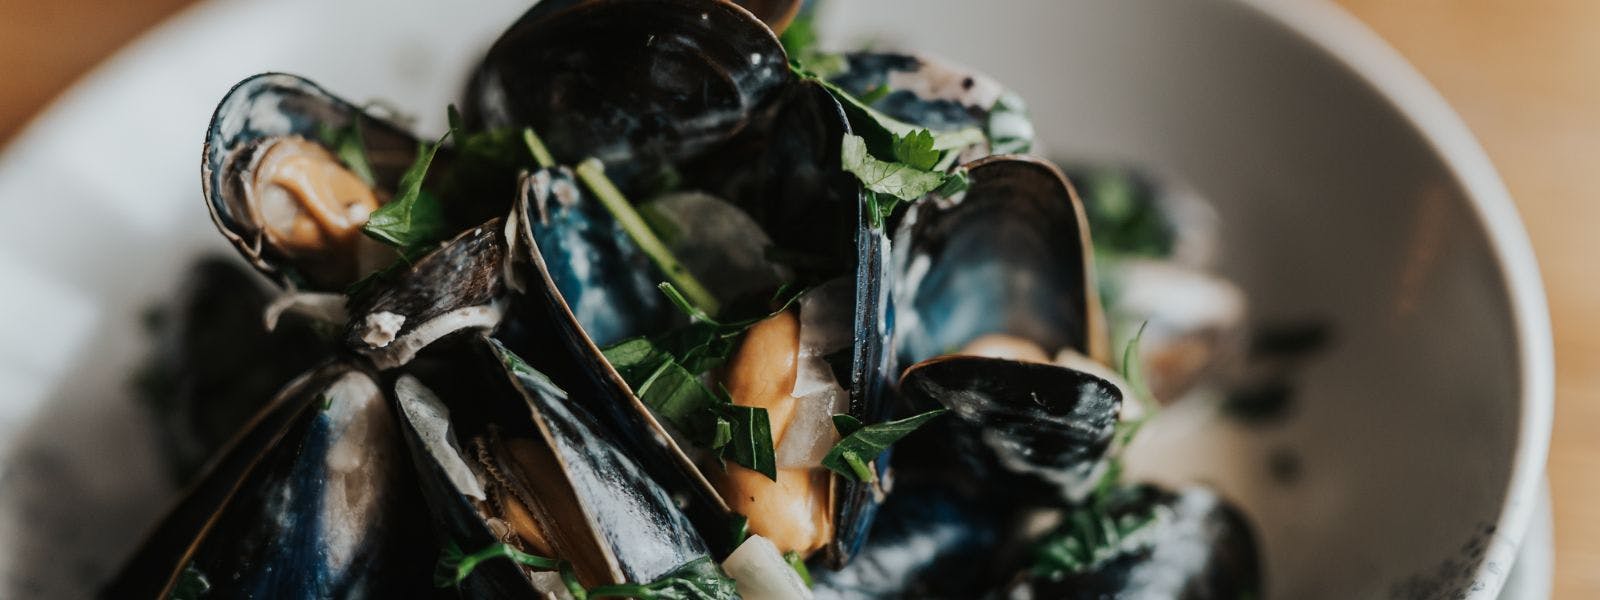 A bowl of mussels with fresh herbs on a wooden table, showcasing a delectable seafood dish.